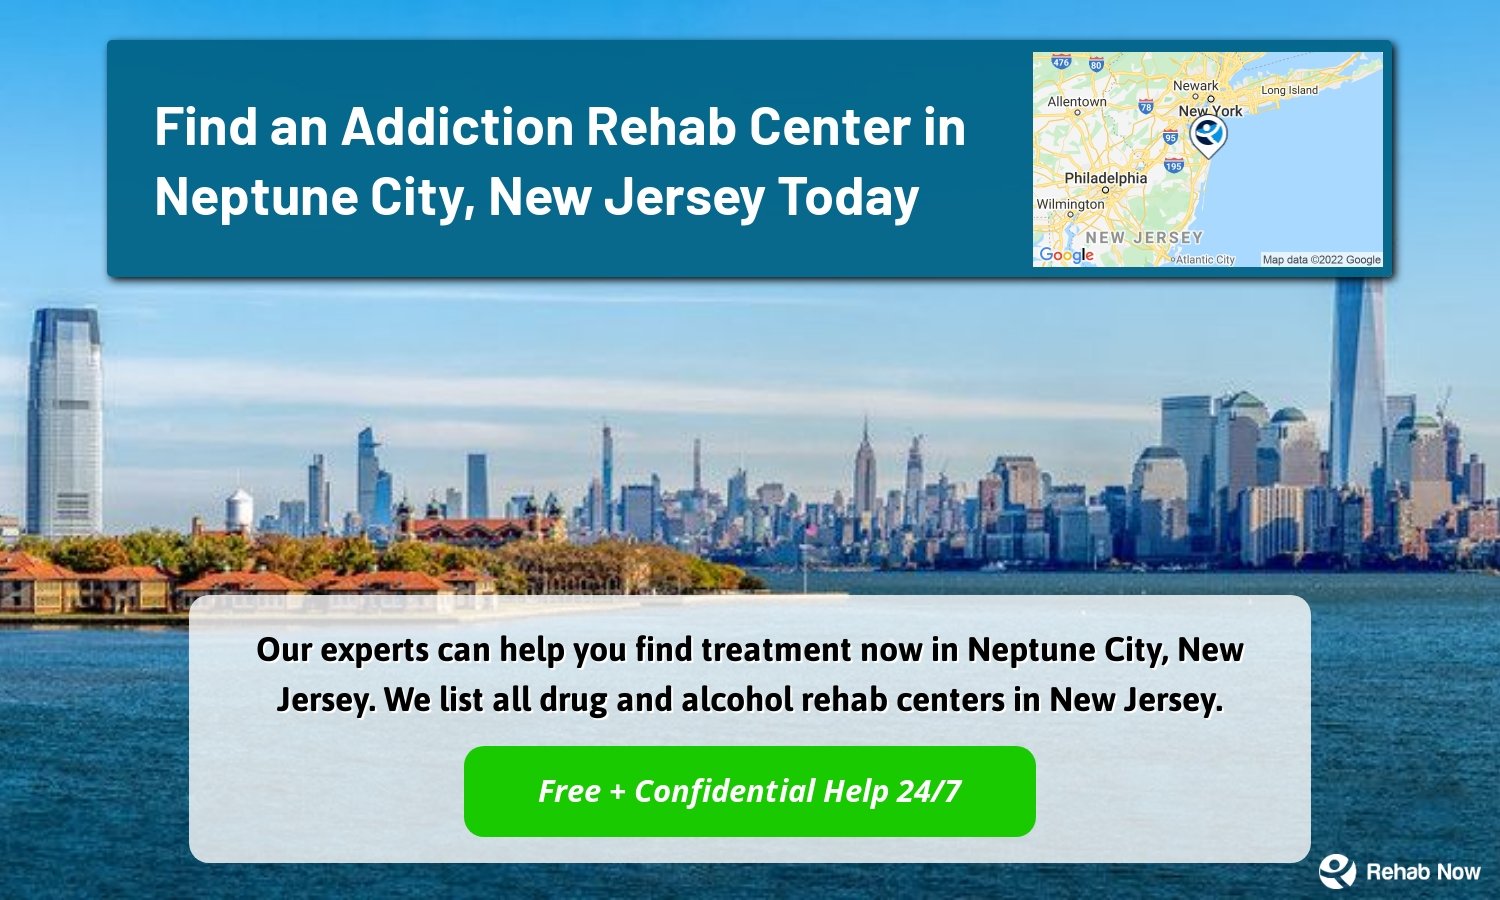 Our experts can help you find treatment now in Neptune City, New Jersey. We list all drug and alcohol rehab centers in New Jersey.